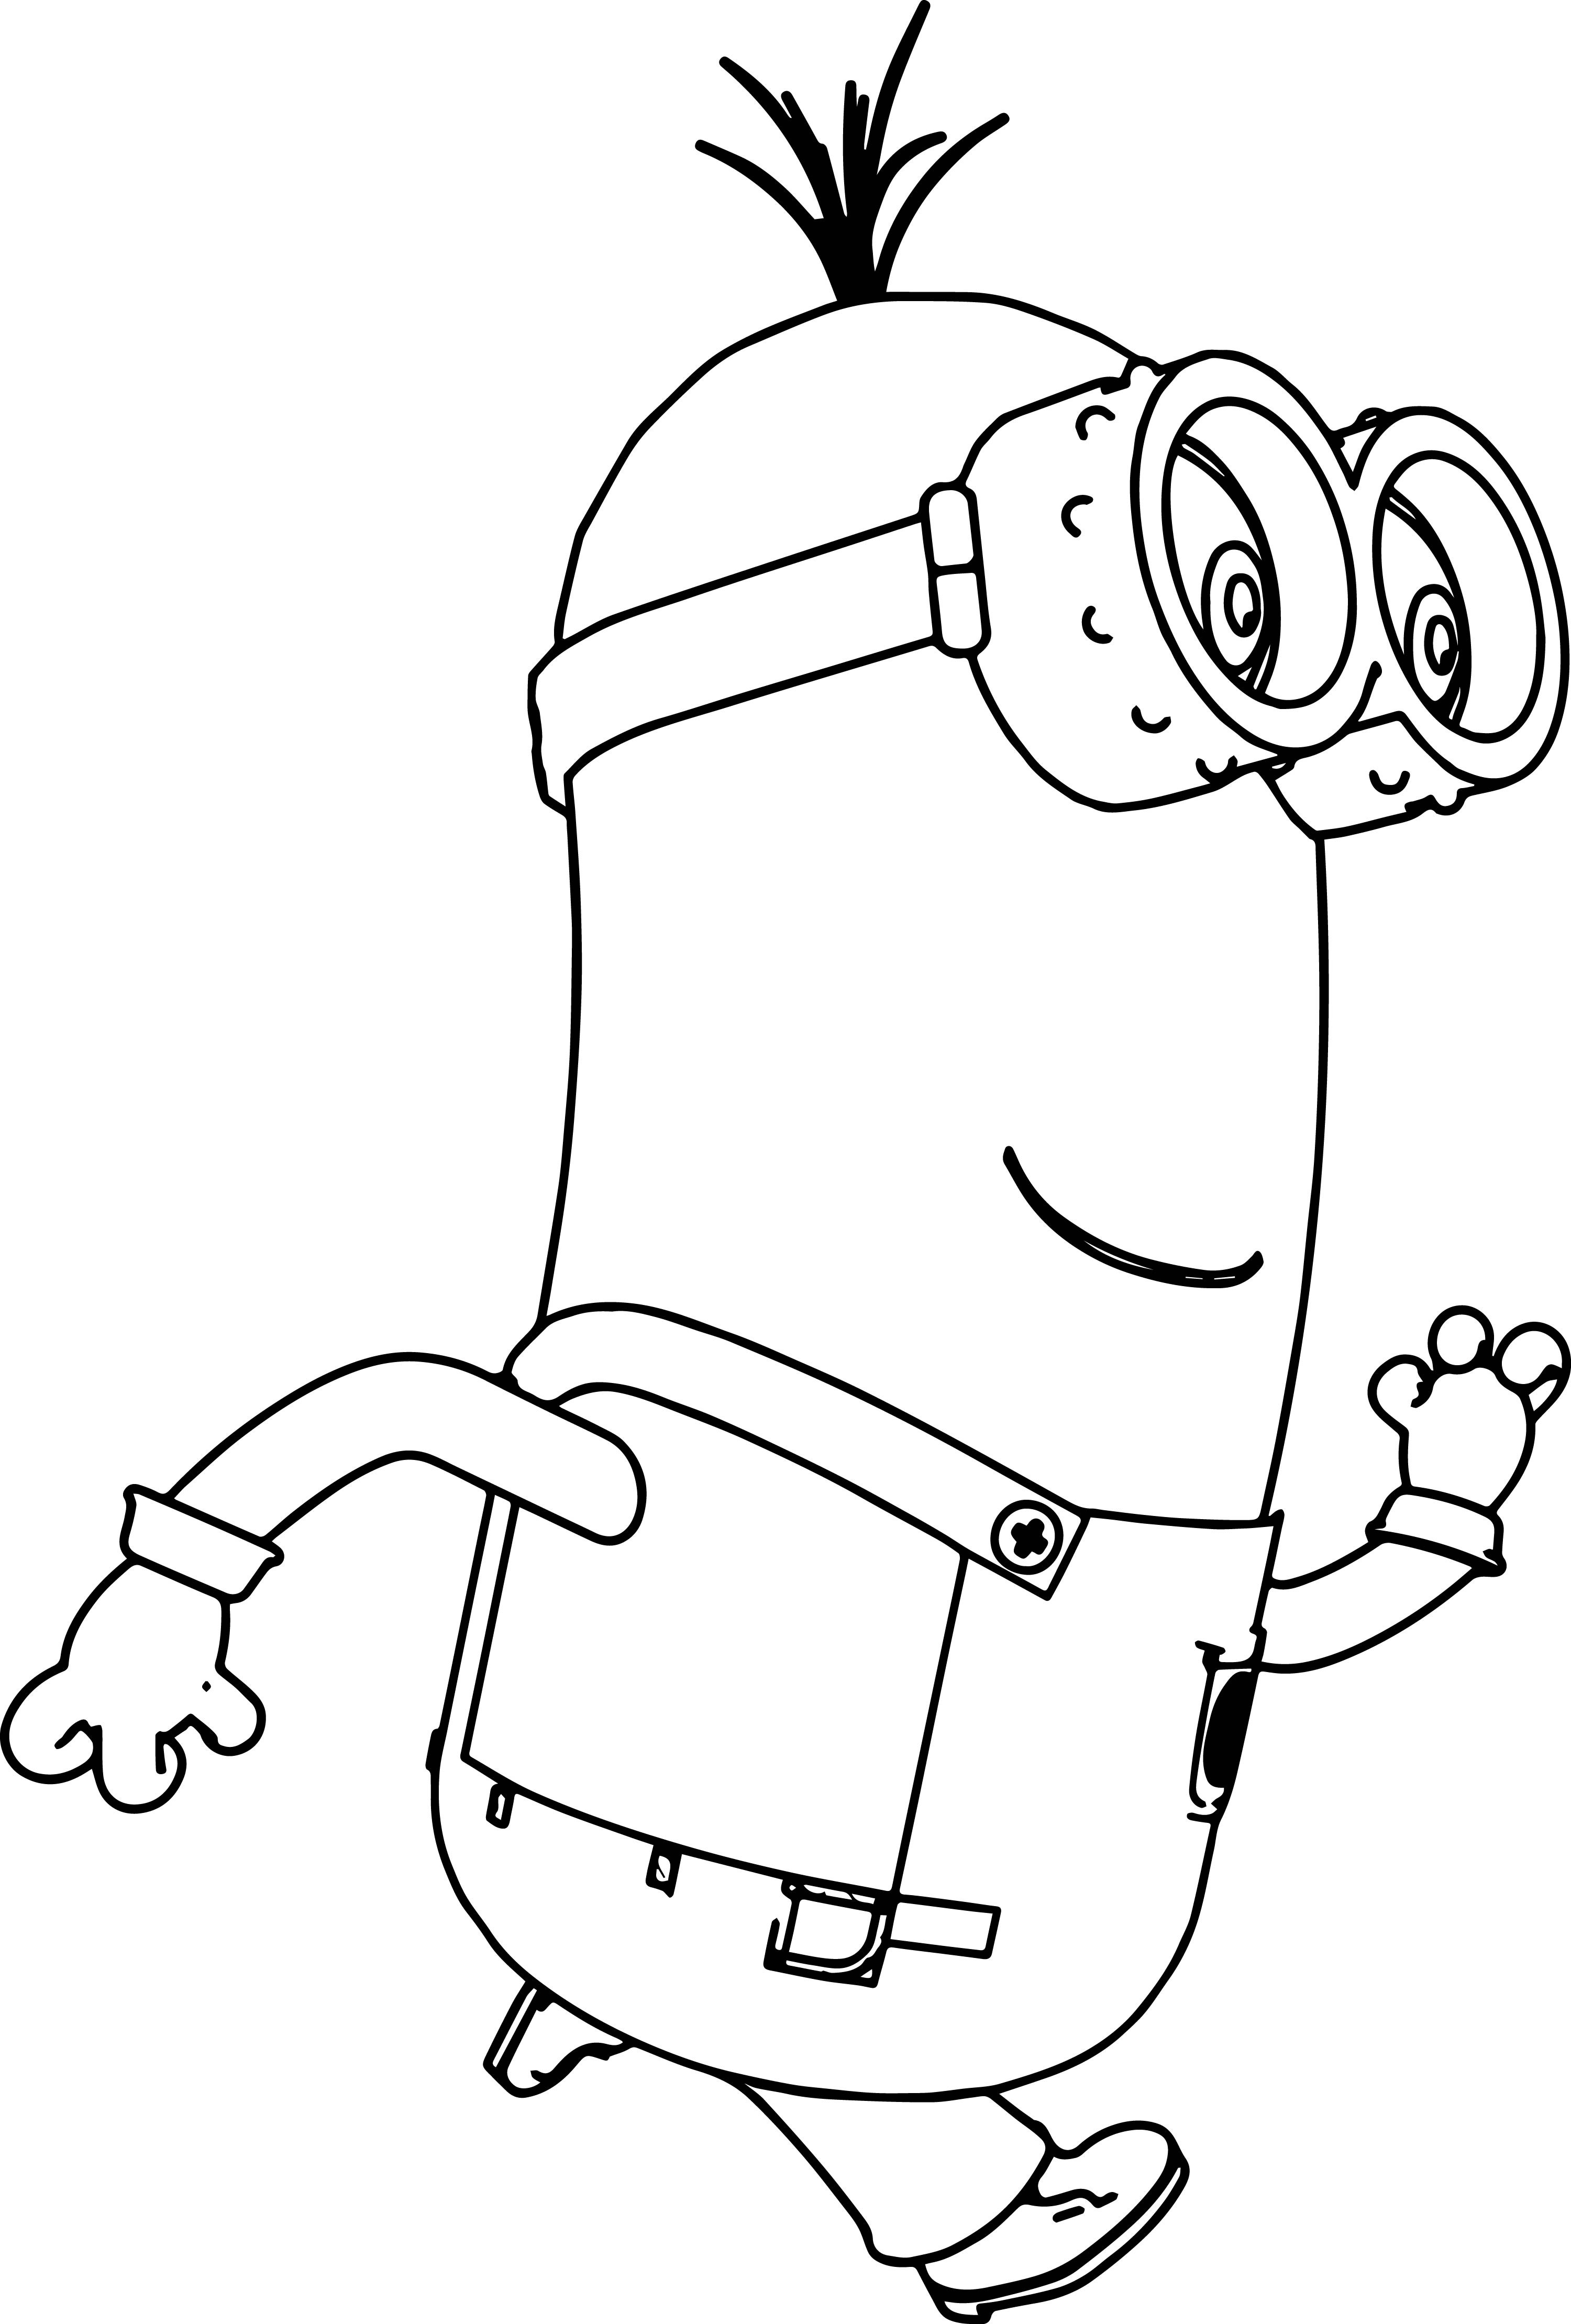 Minion Coloring Pages Pdf
 Despicable Me Minions Coloring Page